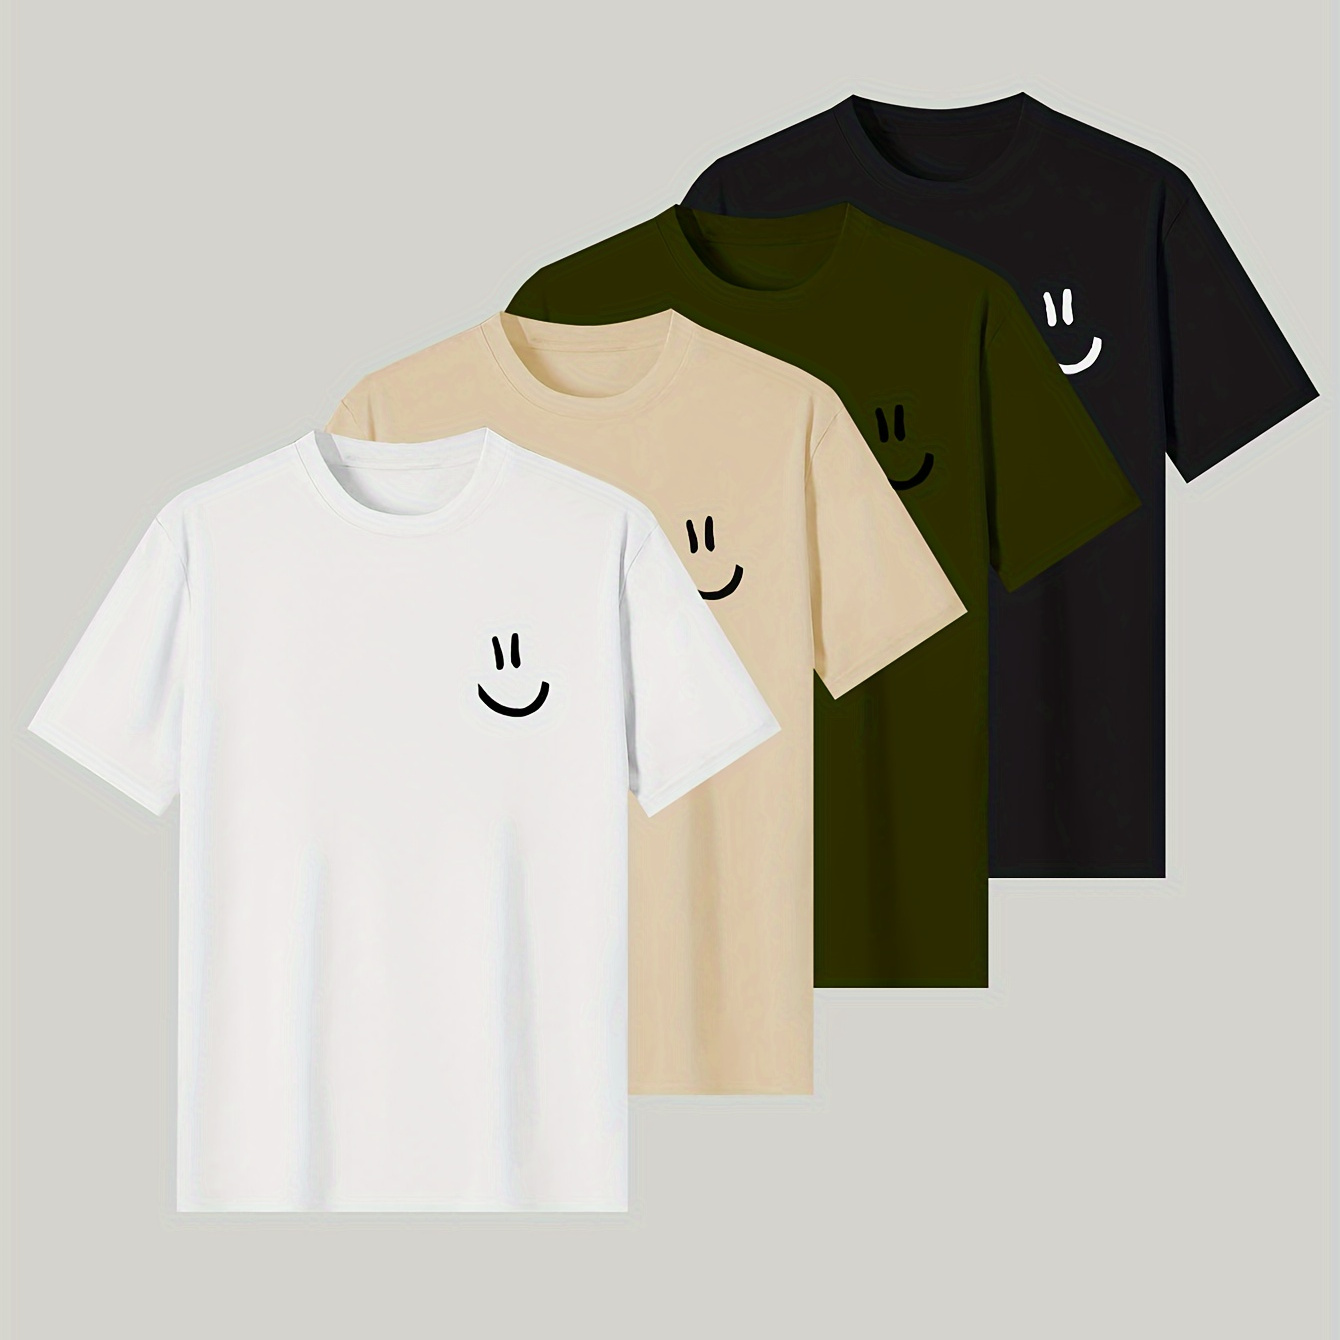 

4pcs Men's Simple Style Casual Cartoon Smile Face Graphic Print Tees, Comfy Short Sleeve Crew Neck T-shirt Moisture Wicking Home Pajamas Top Men's Summer Outdoor Clothing